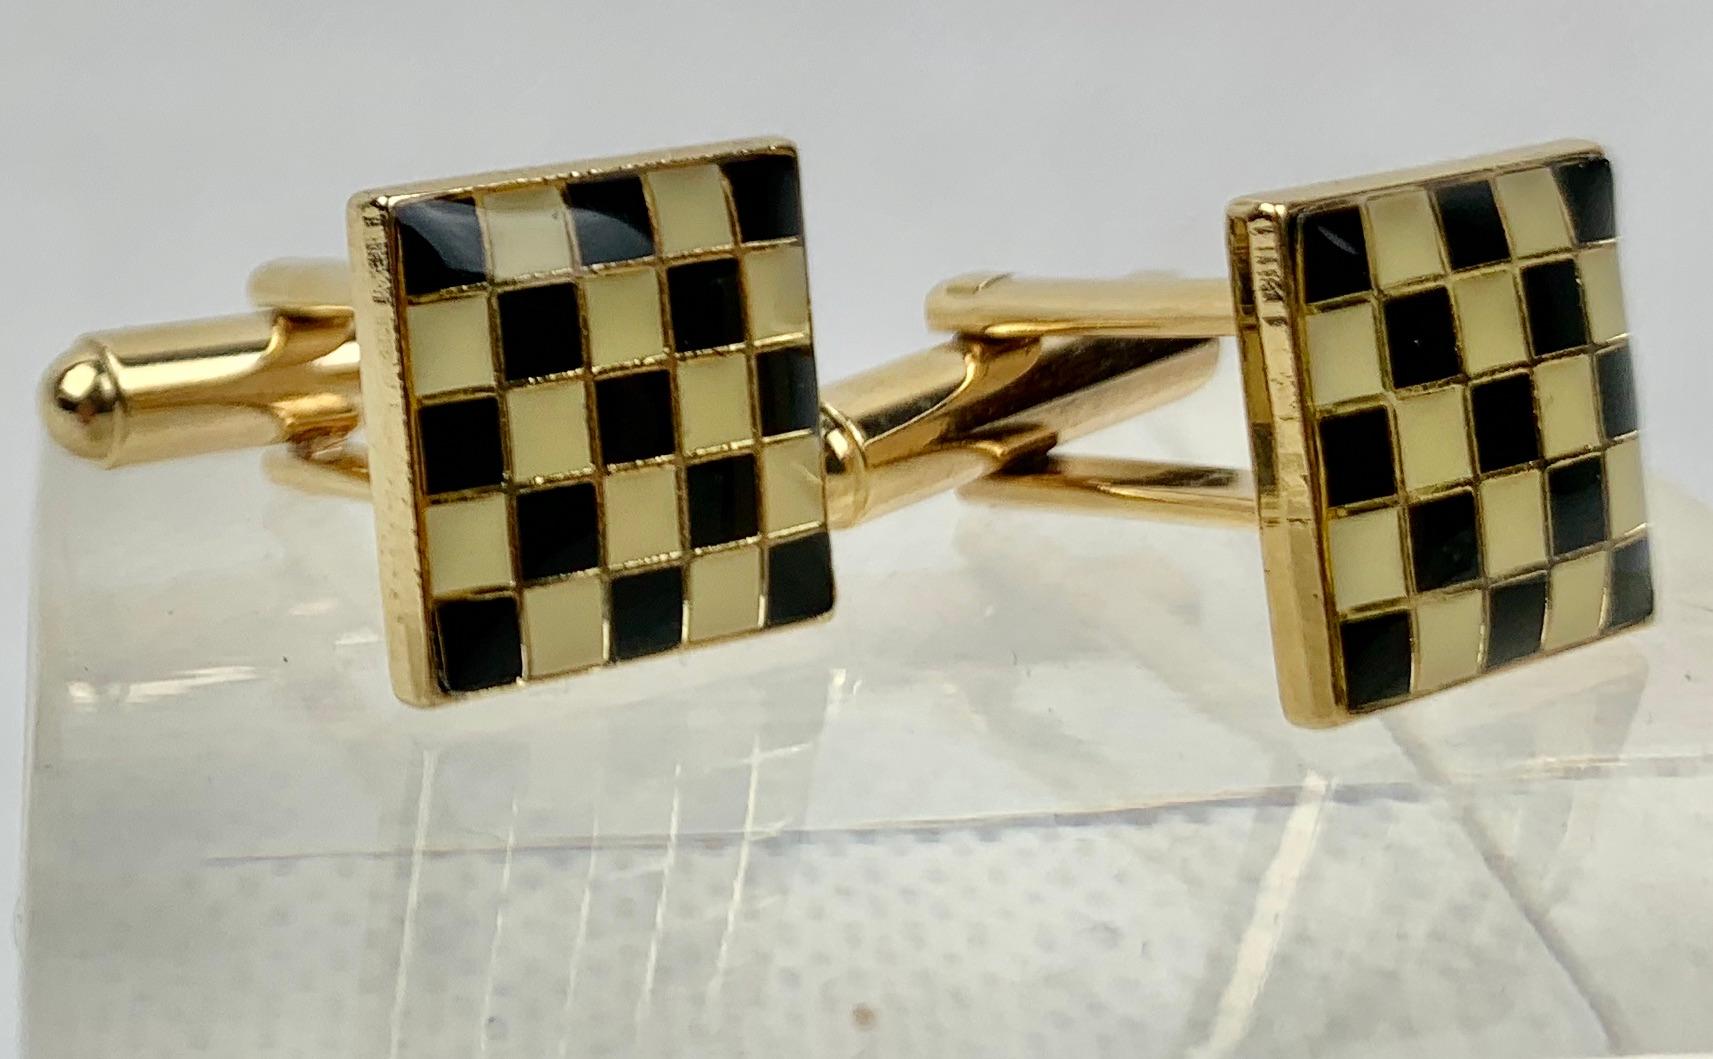 Pair of vintage gold filled cufflinks with a checkerboard pattern of black and cream high fired enamel.  The 